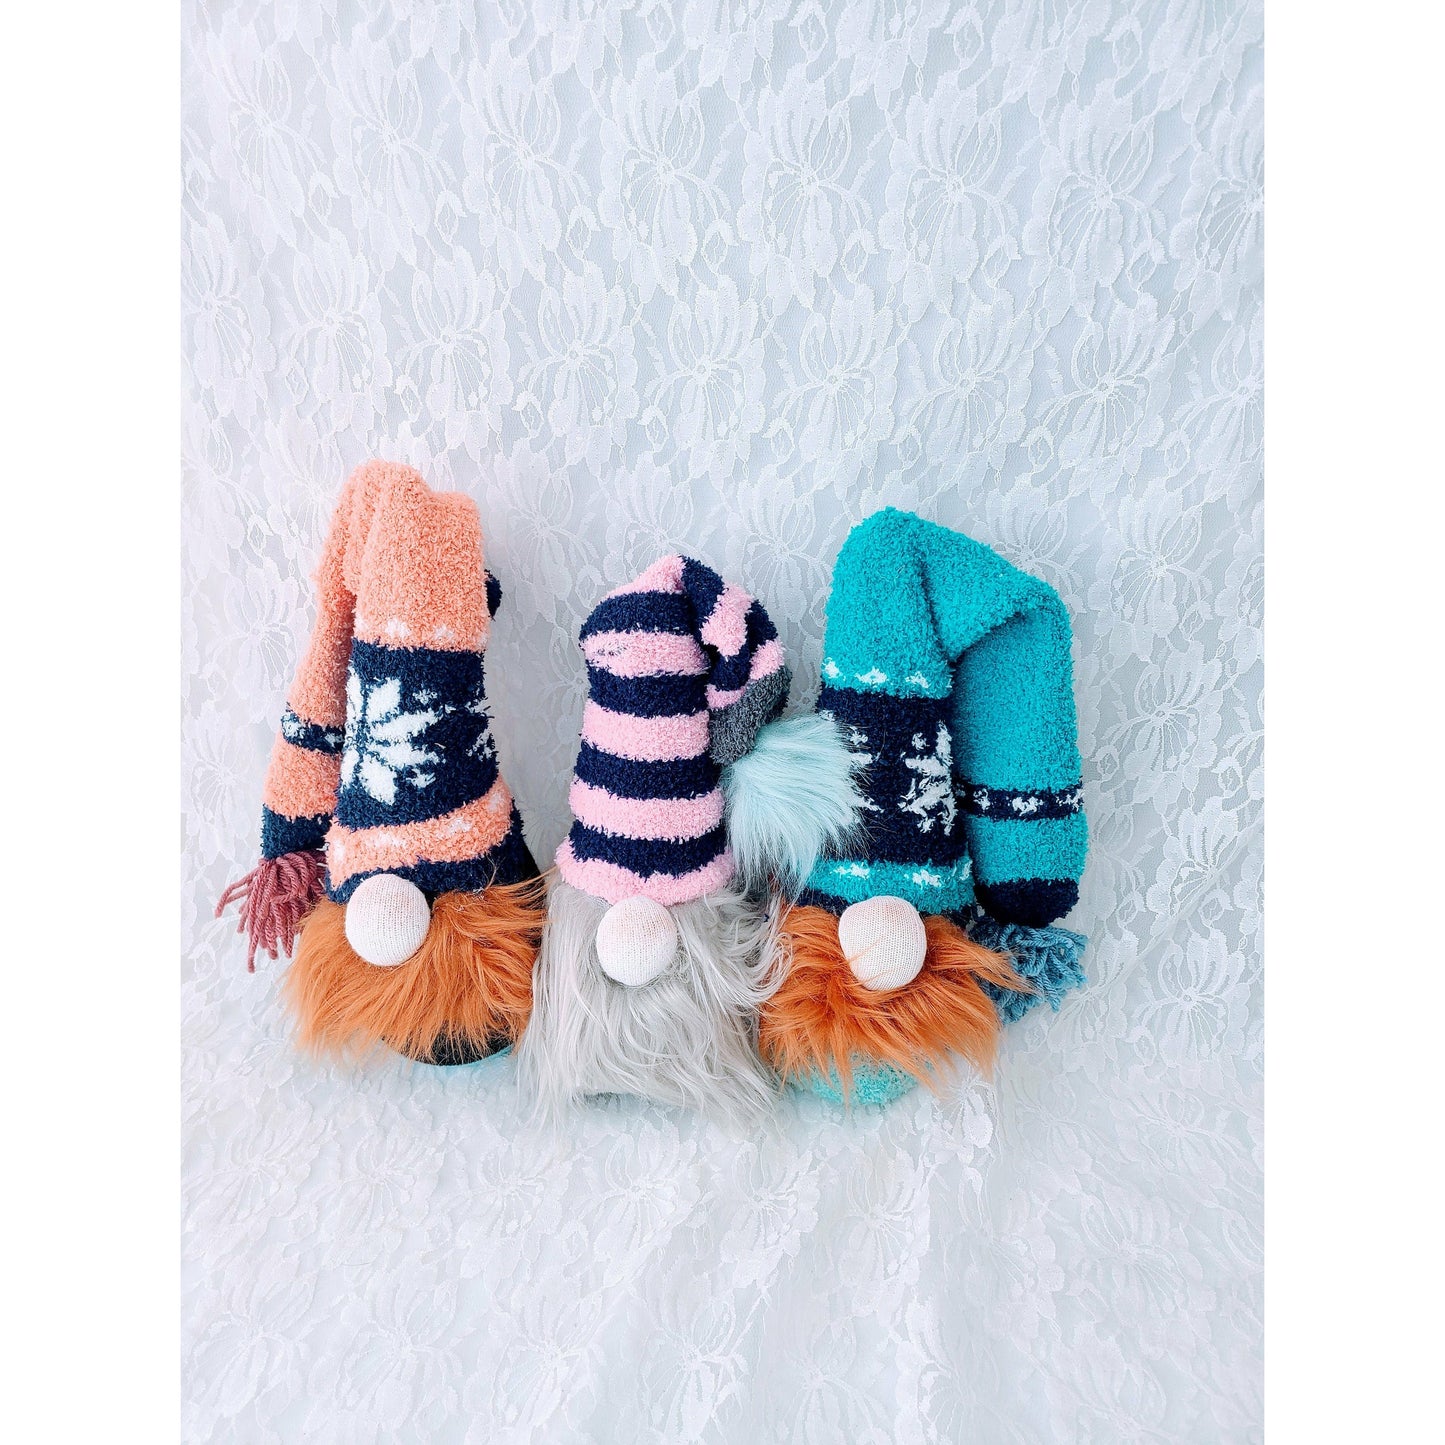 Set of Three (3) Handmade Nordic Sock Gnomes ~ Woodland Elf Gnomes ~ Christmas Decorations ~ Or Give Them As Gifts!